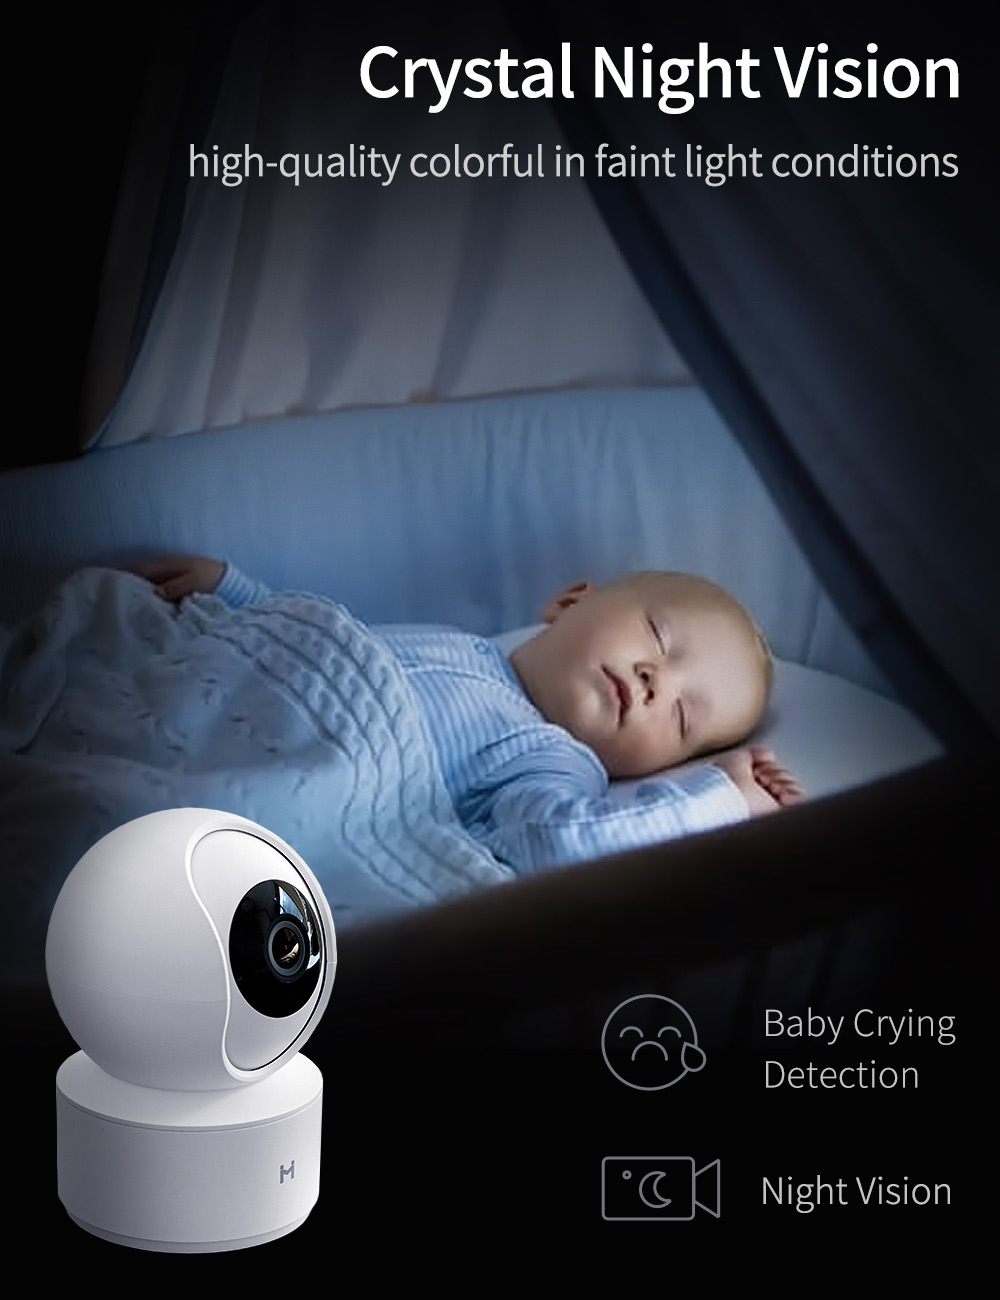 1080P Wireless Smart Home Indoor Baby IP Security Camera IMILAB WiFi Surveillance Dome Camera Pet Nanny Monitor Night Vision